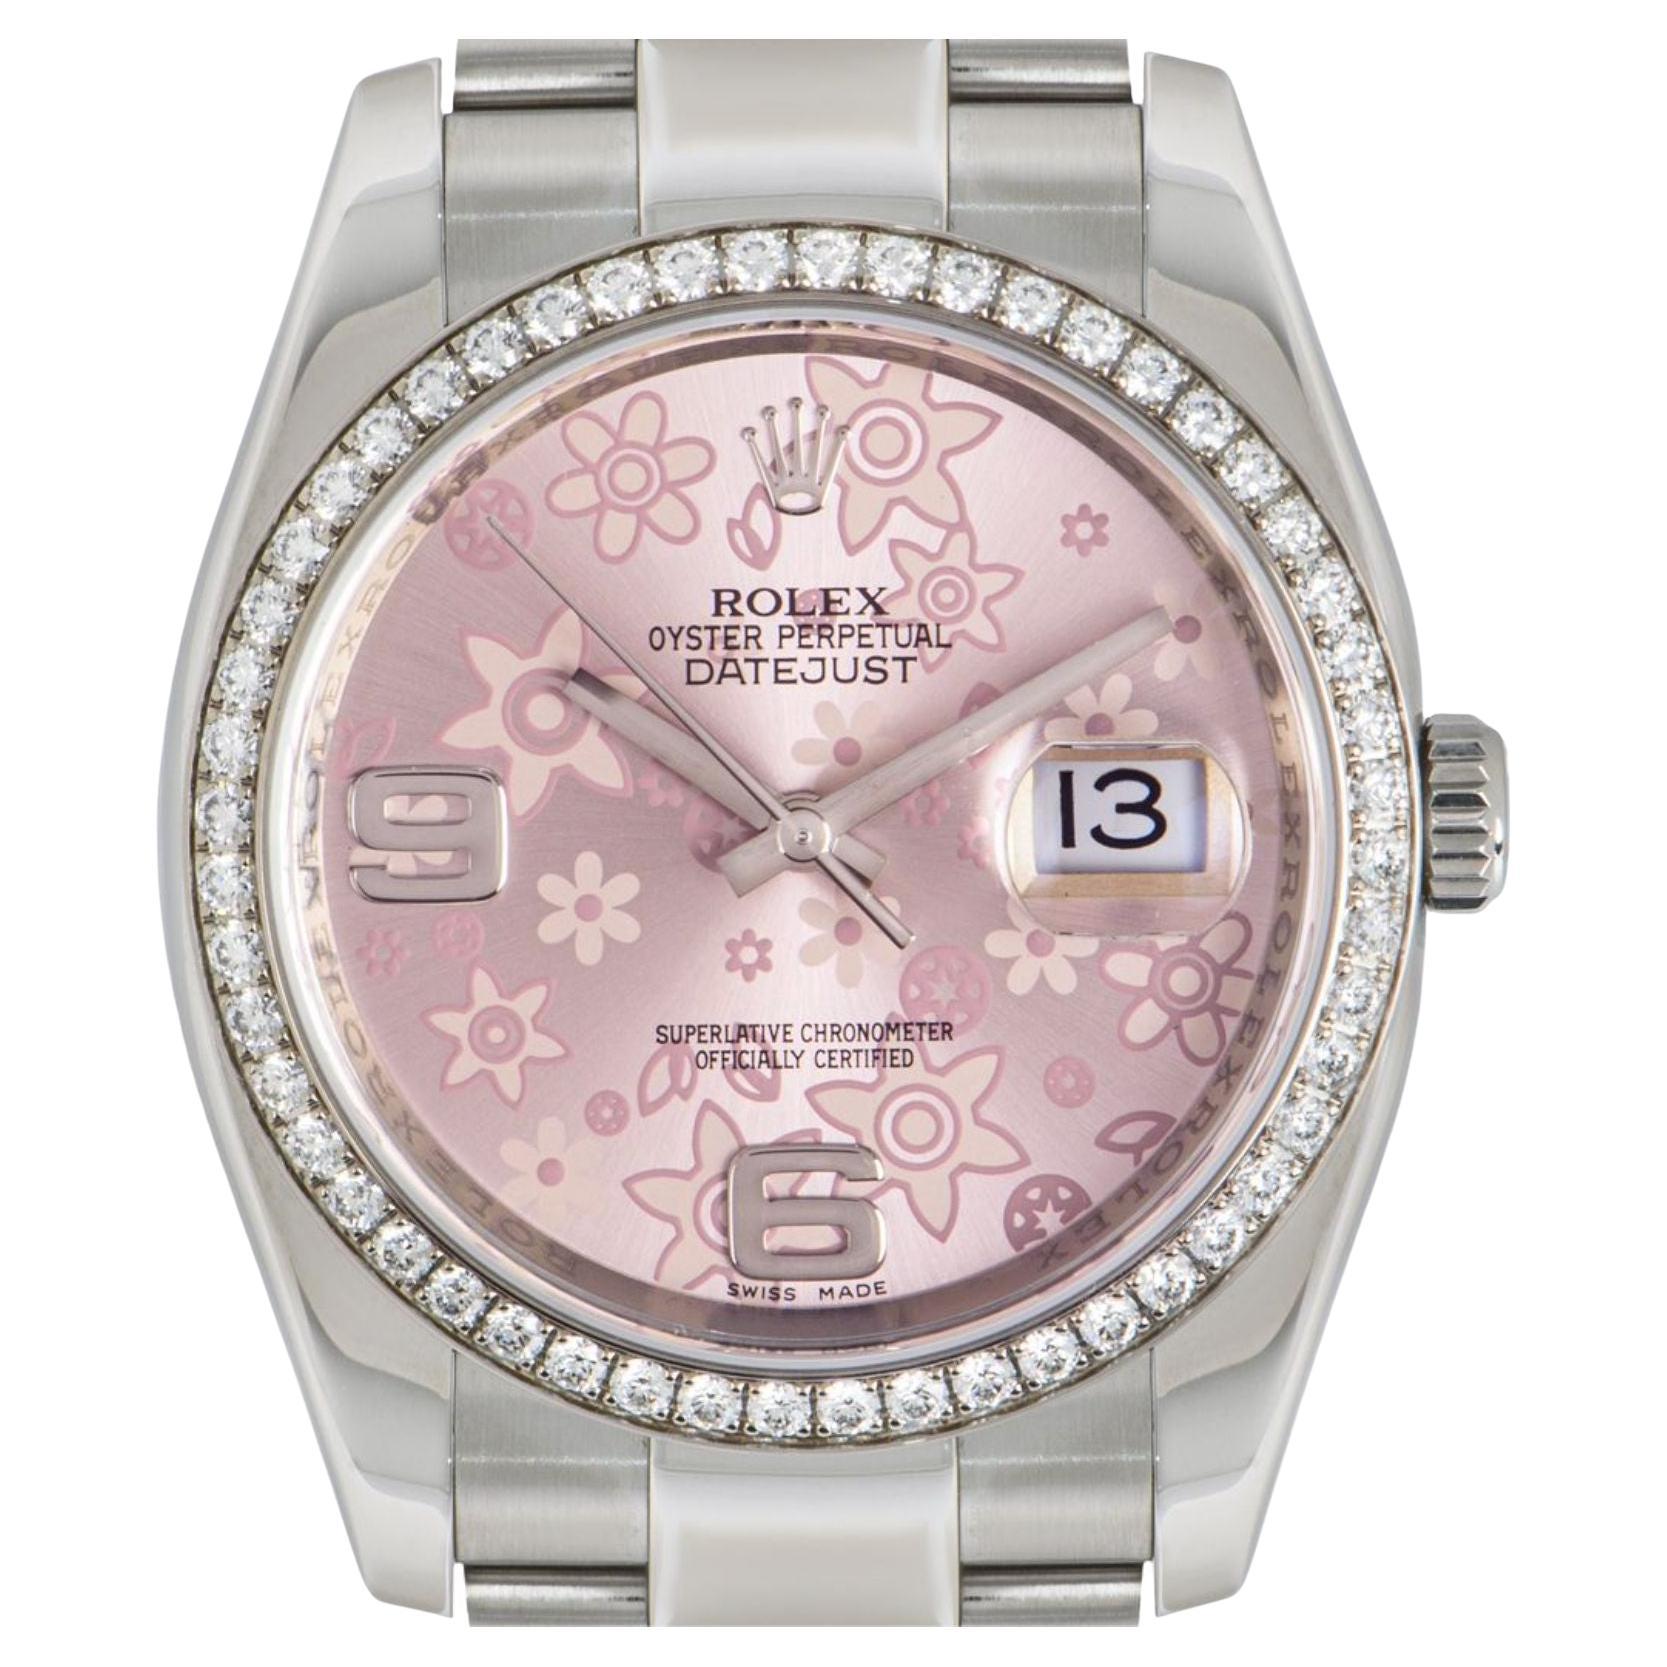 A stainless steel 36mm Datejust by Rolex, featuring a pink floral dial and bezel which is set with 52 round brilliant cut diamonds. The Oyster bracelet is equipped with a folding Oysterclasp. Fitted with sapphire crystal and a self-winding automatic